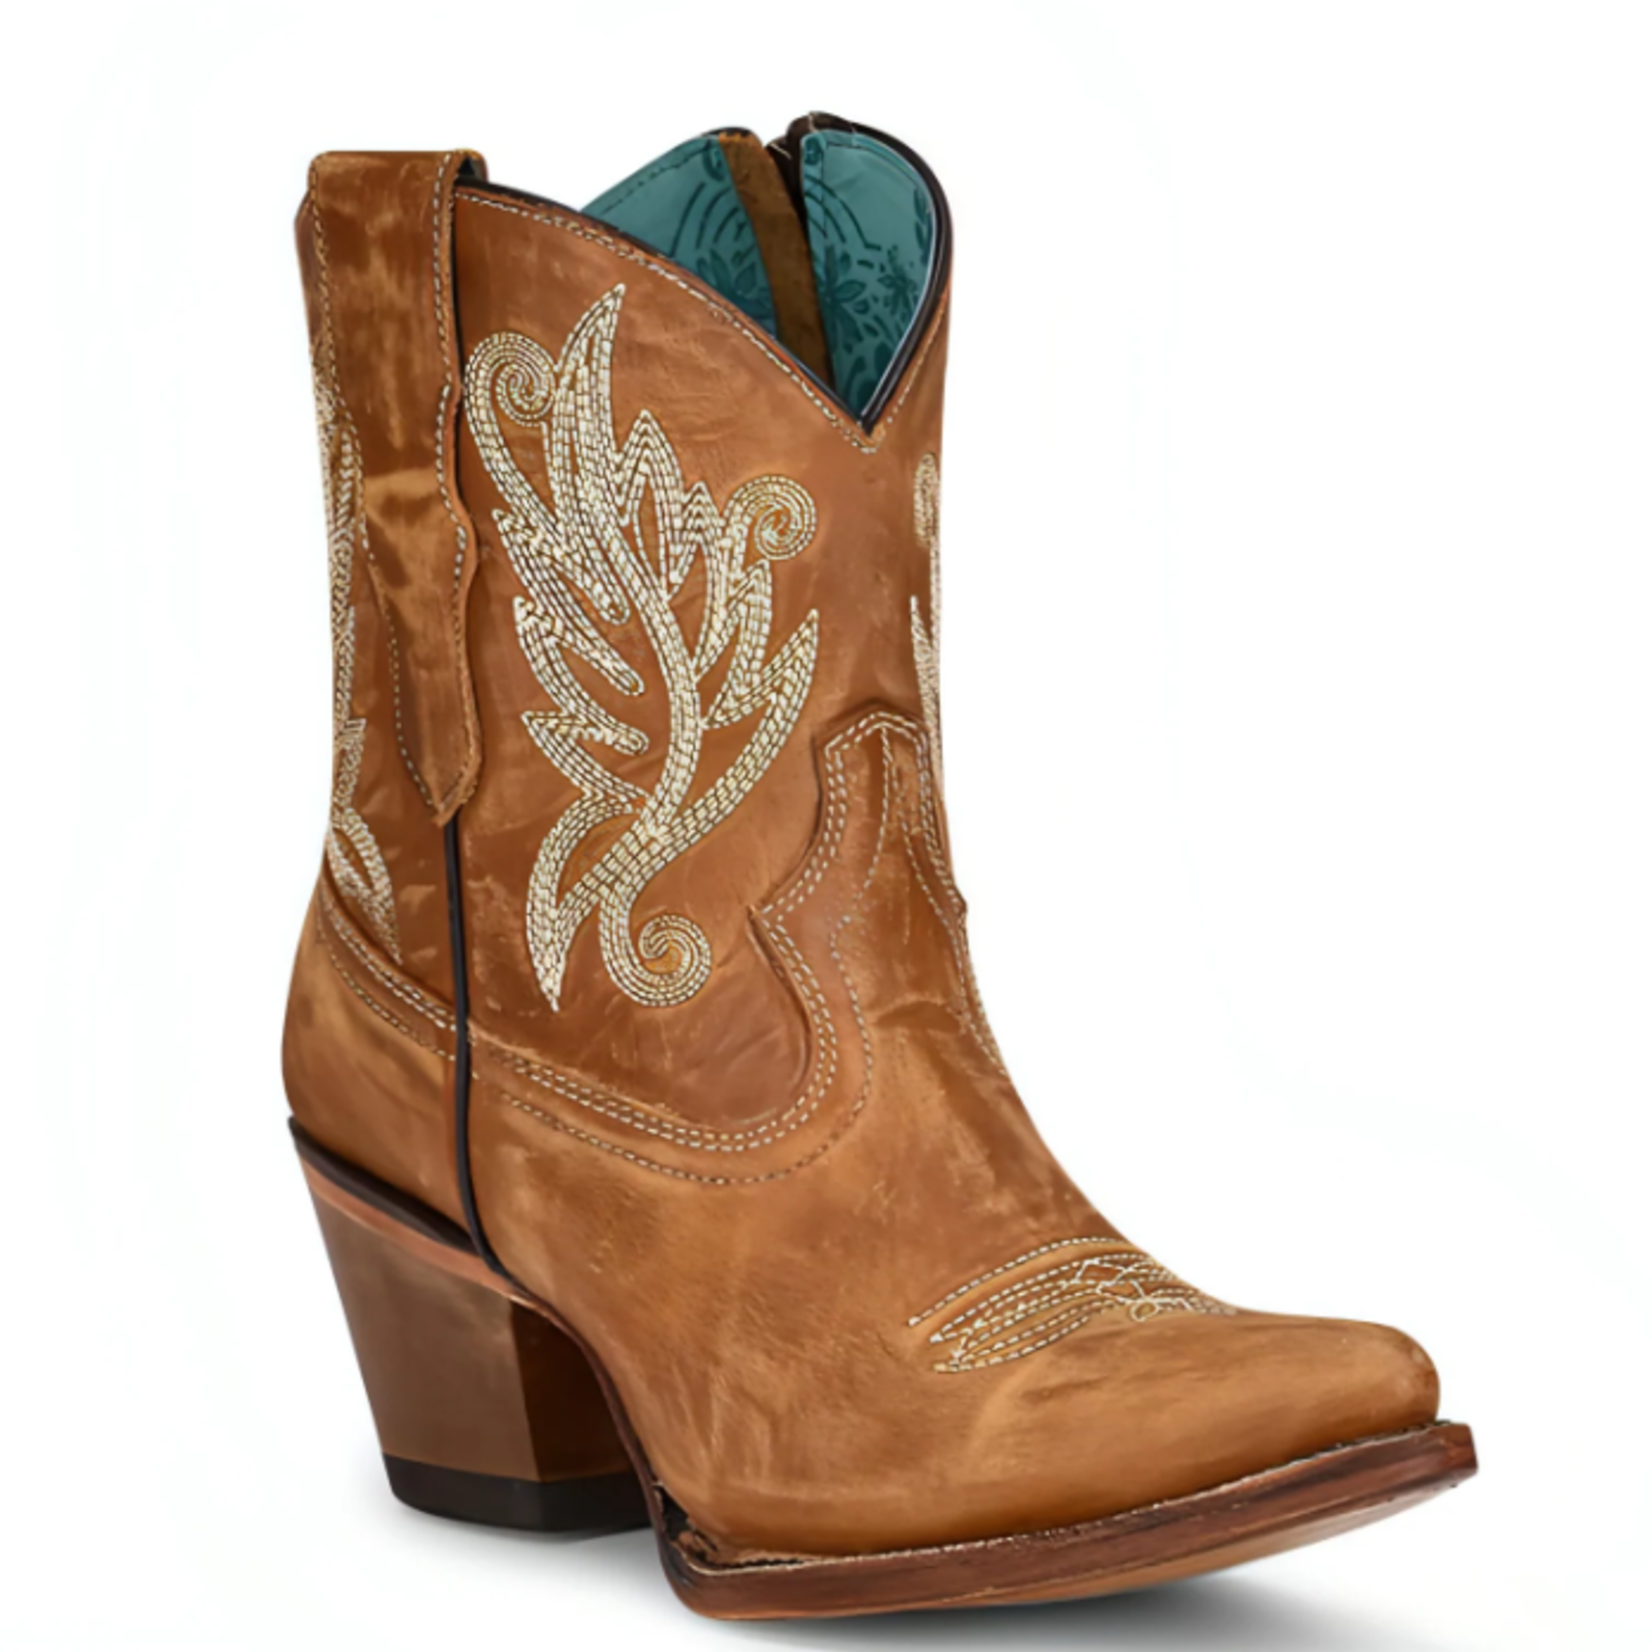 Corral Boot Company Golden Embroidery Ankle Boots